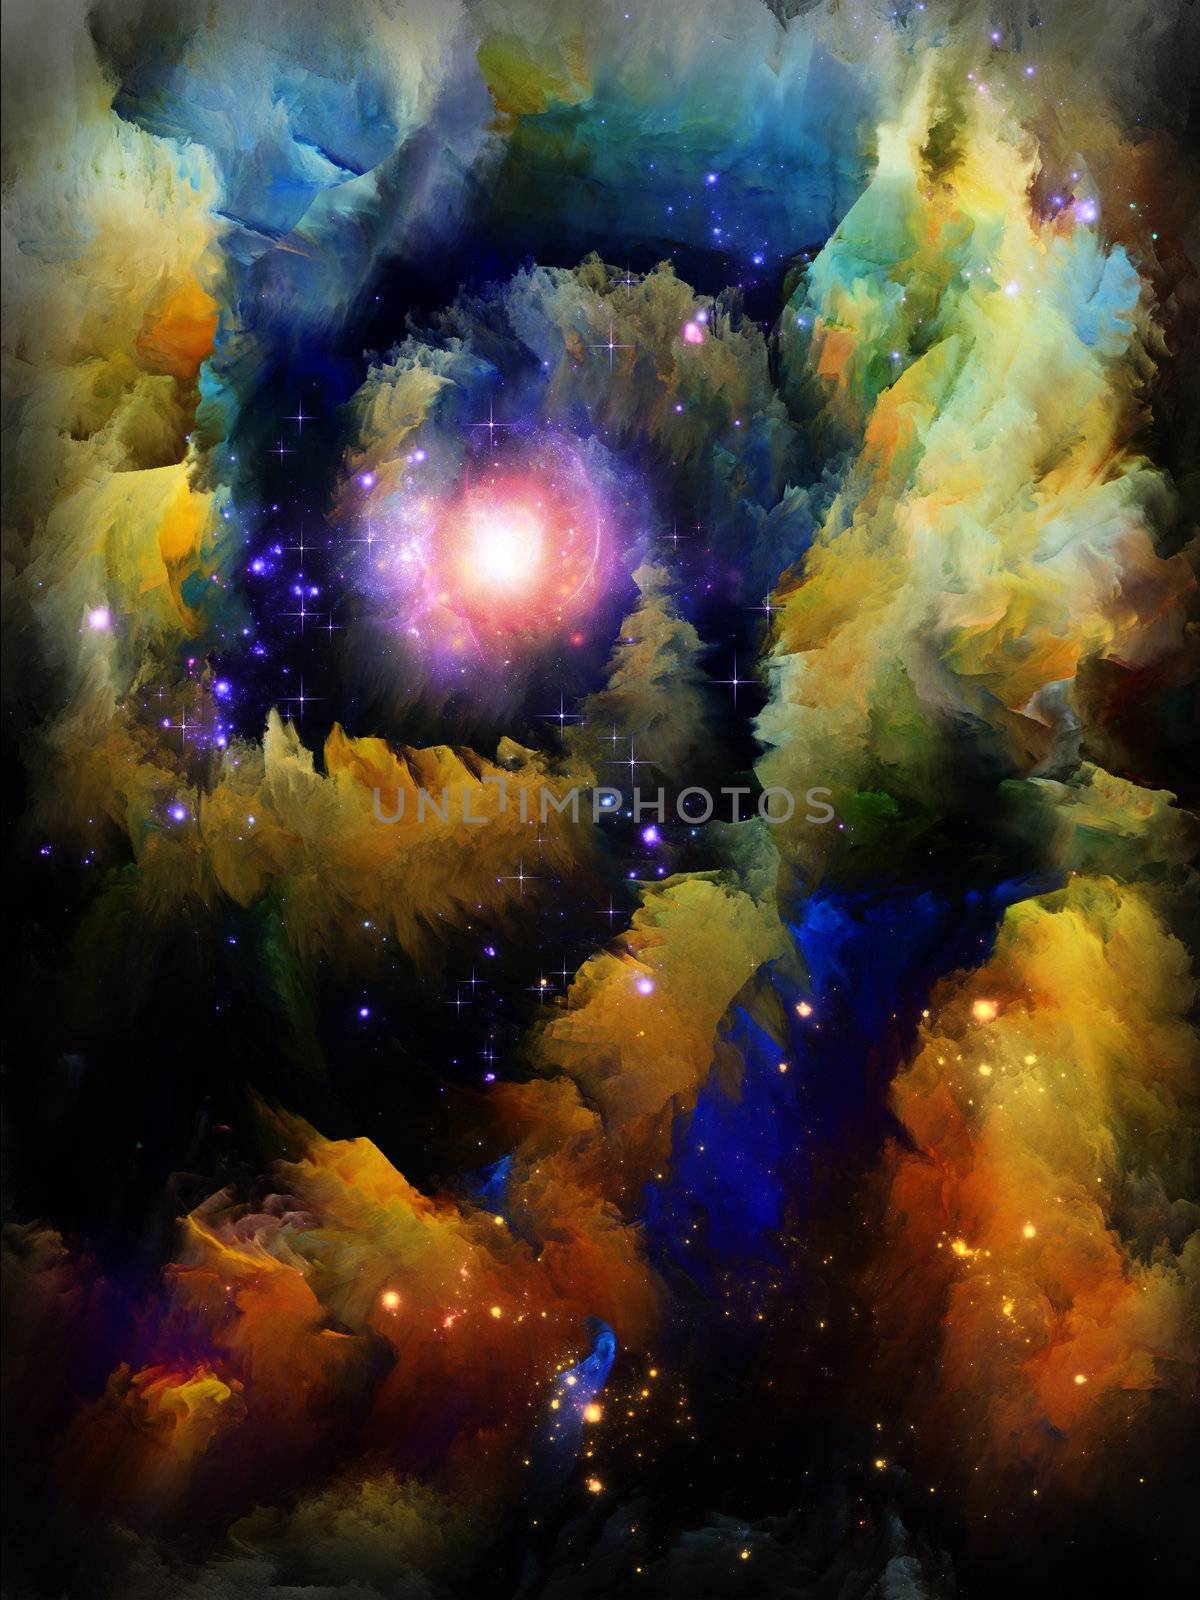 Never Worlds series. Abstract design made of colorful dimensional fractal worlds on the subject of fantasy, dreams, creativity,  imagination and art